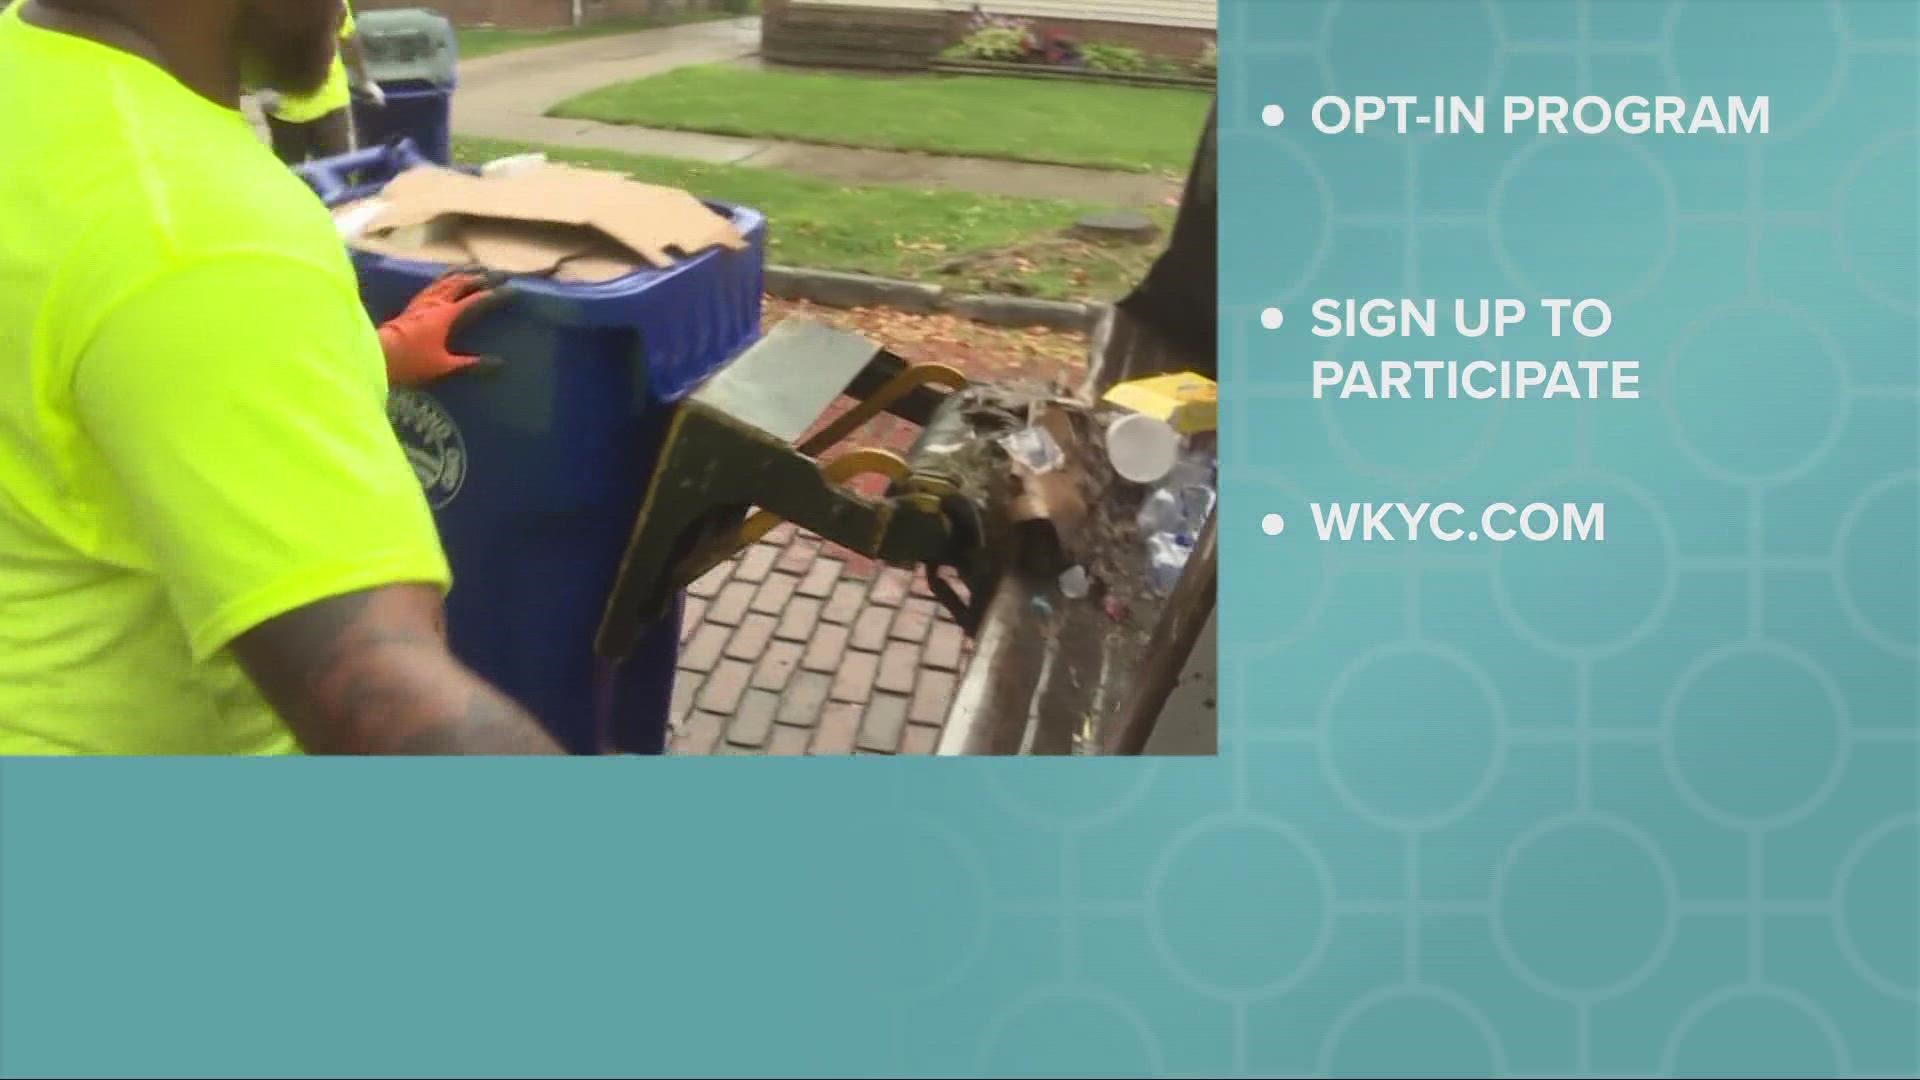 Recyclables will be picked up weekly by city of Cleveland crews beginning June 13, 2022.